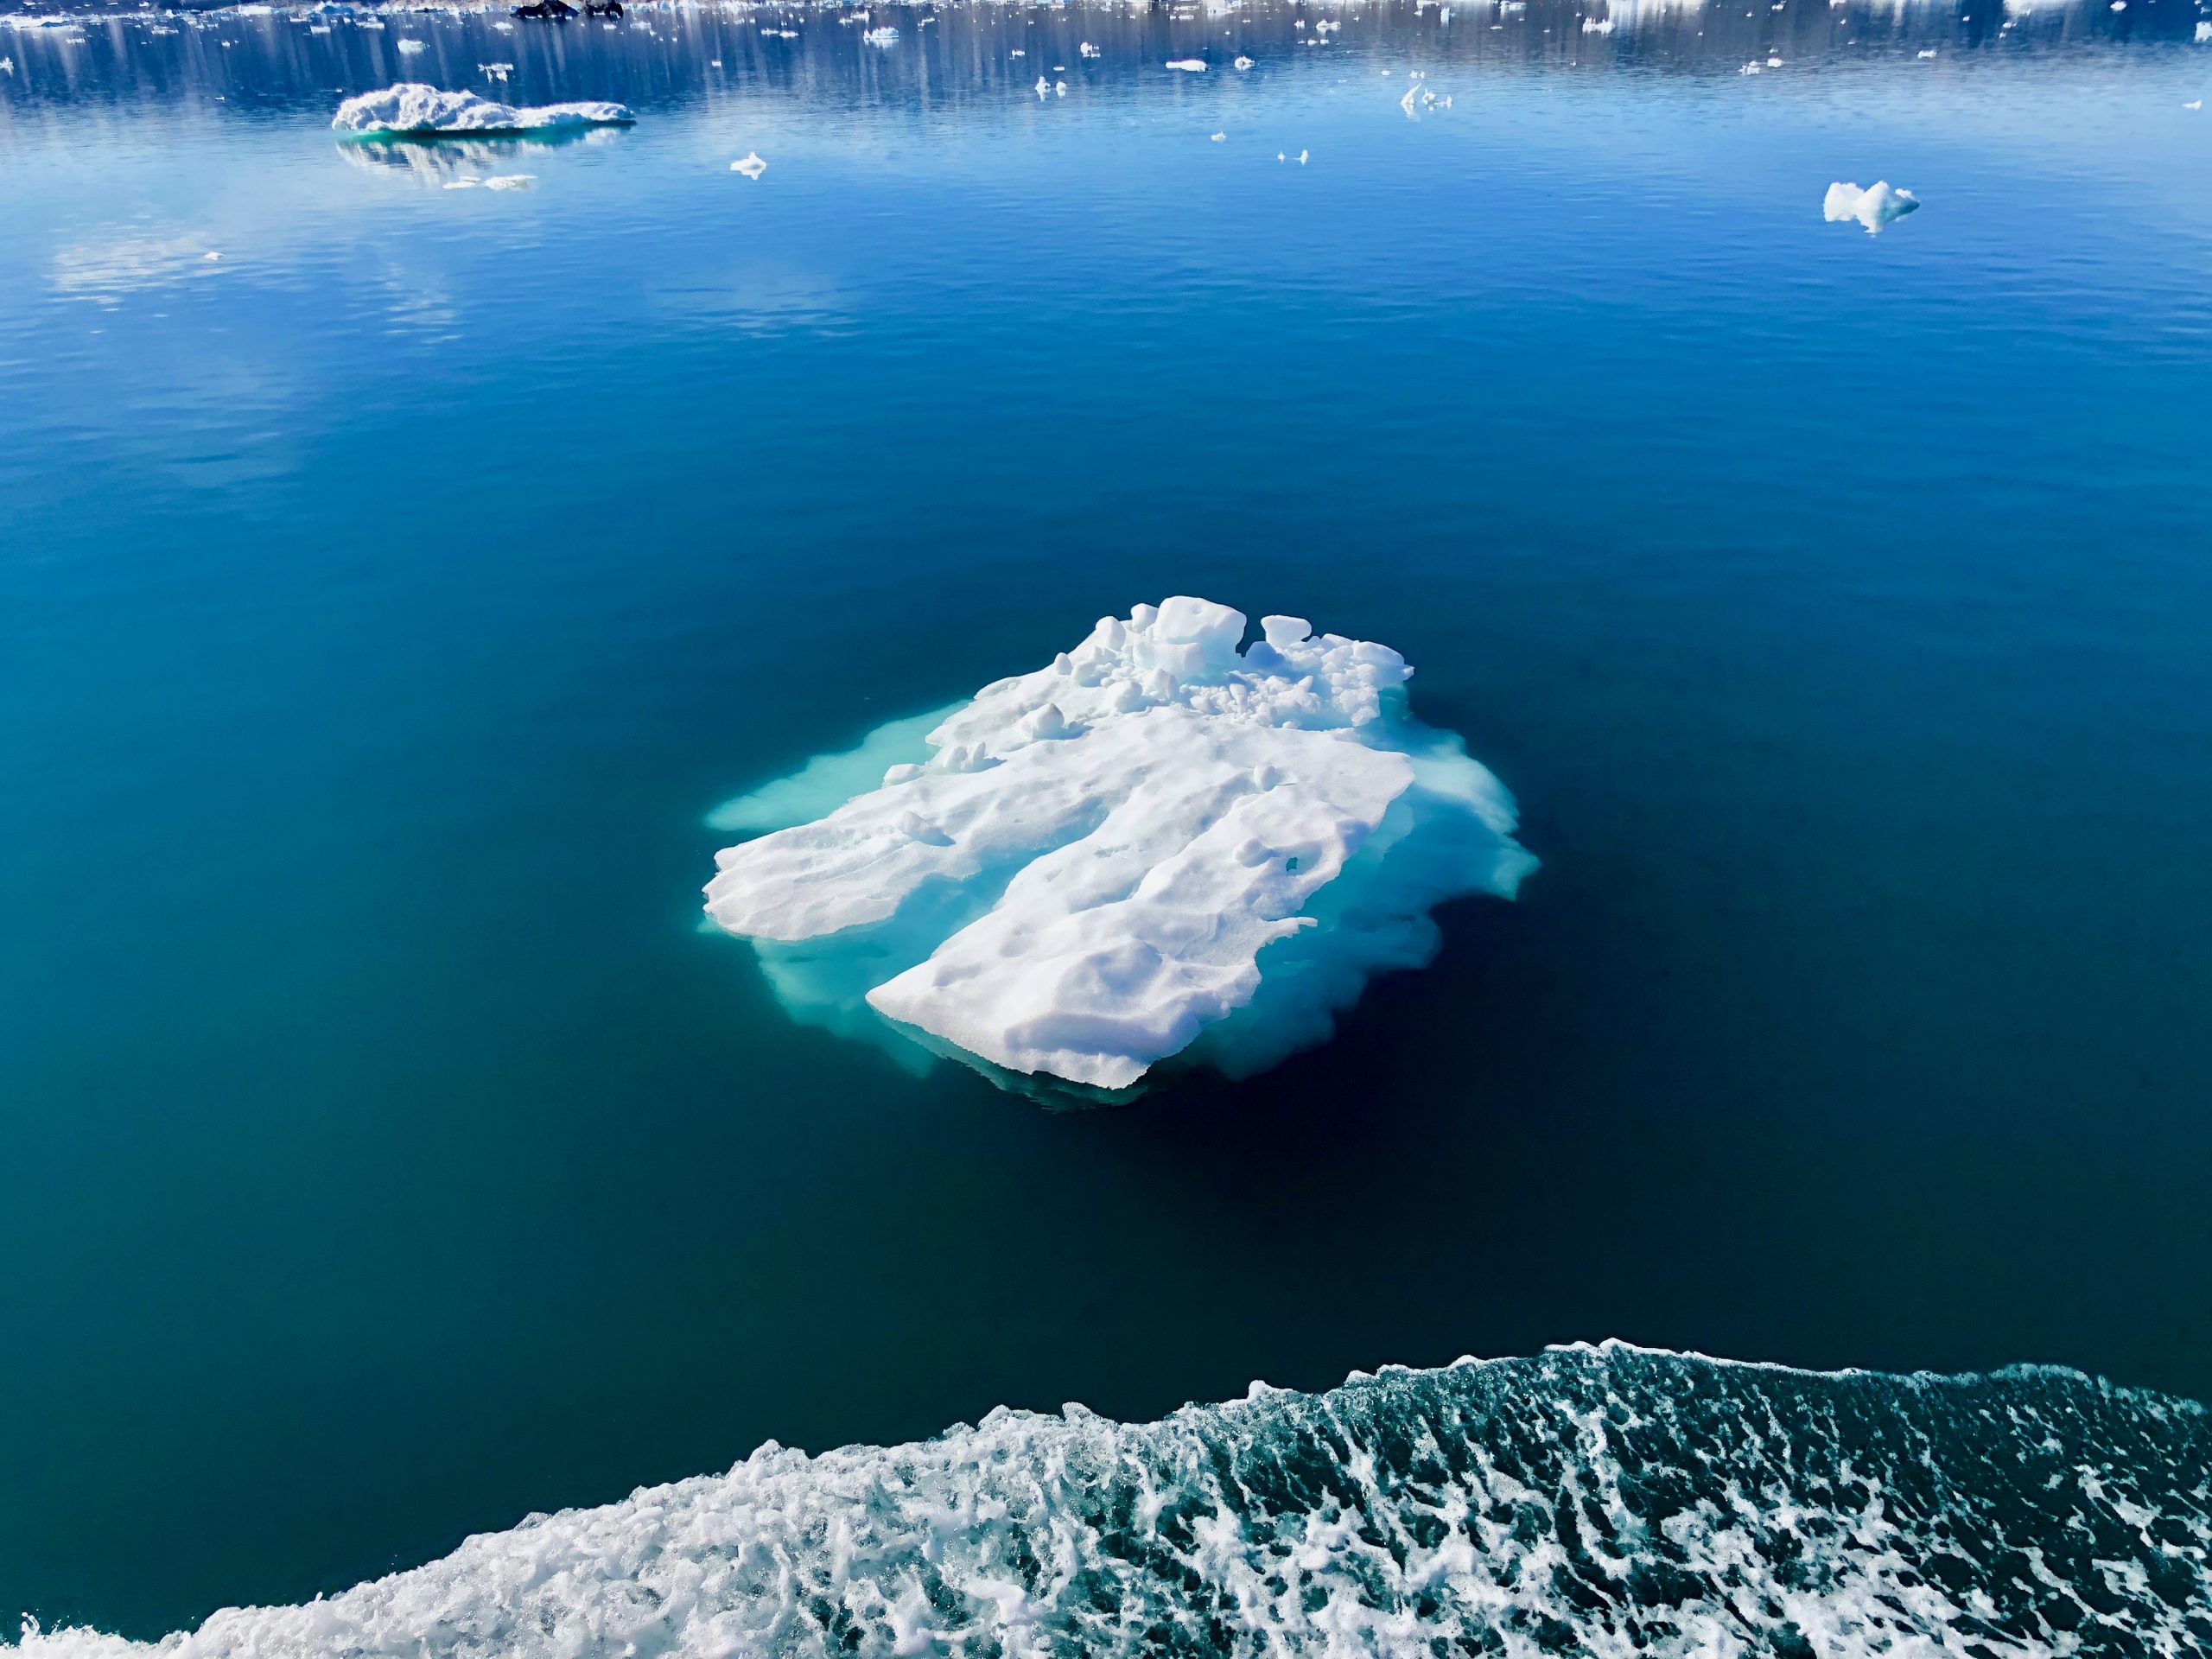 Remnants of sea ice West Greenland . Image: Sonny Whitelaw